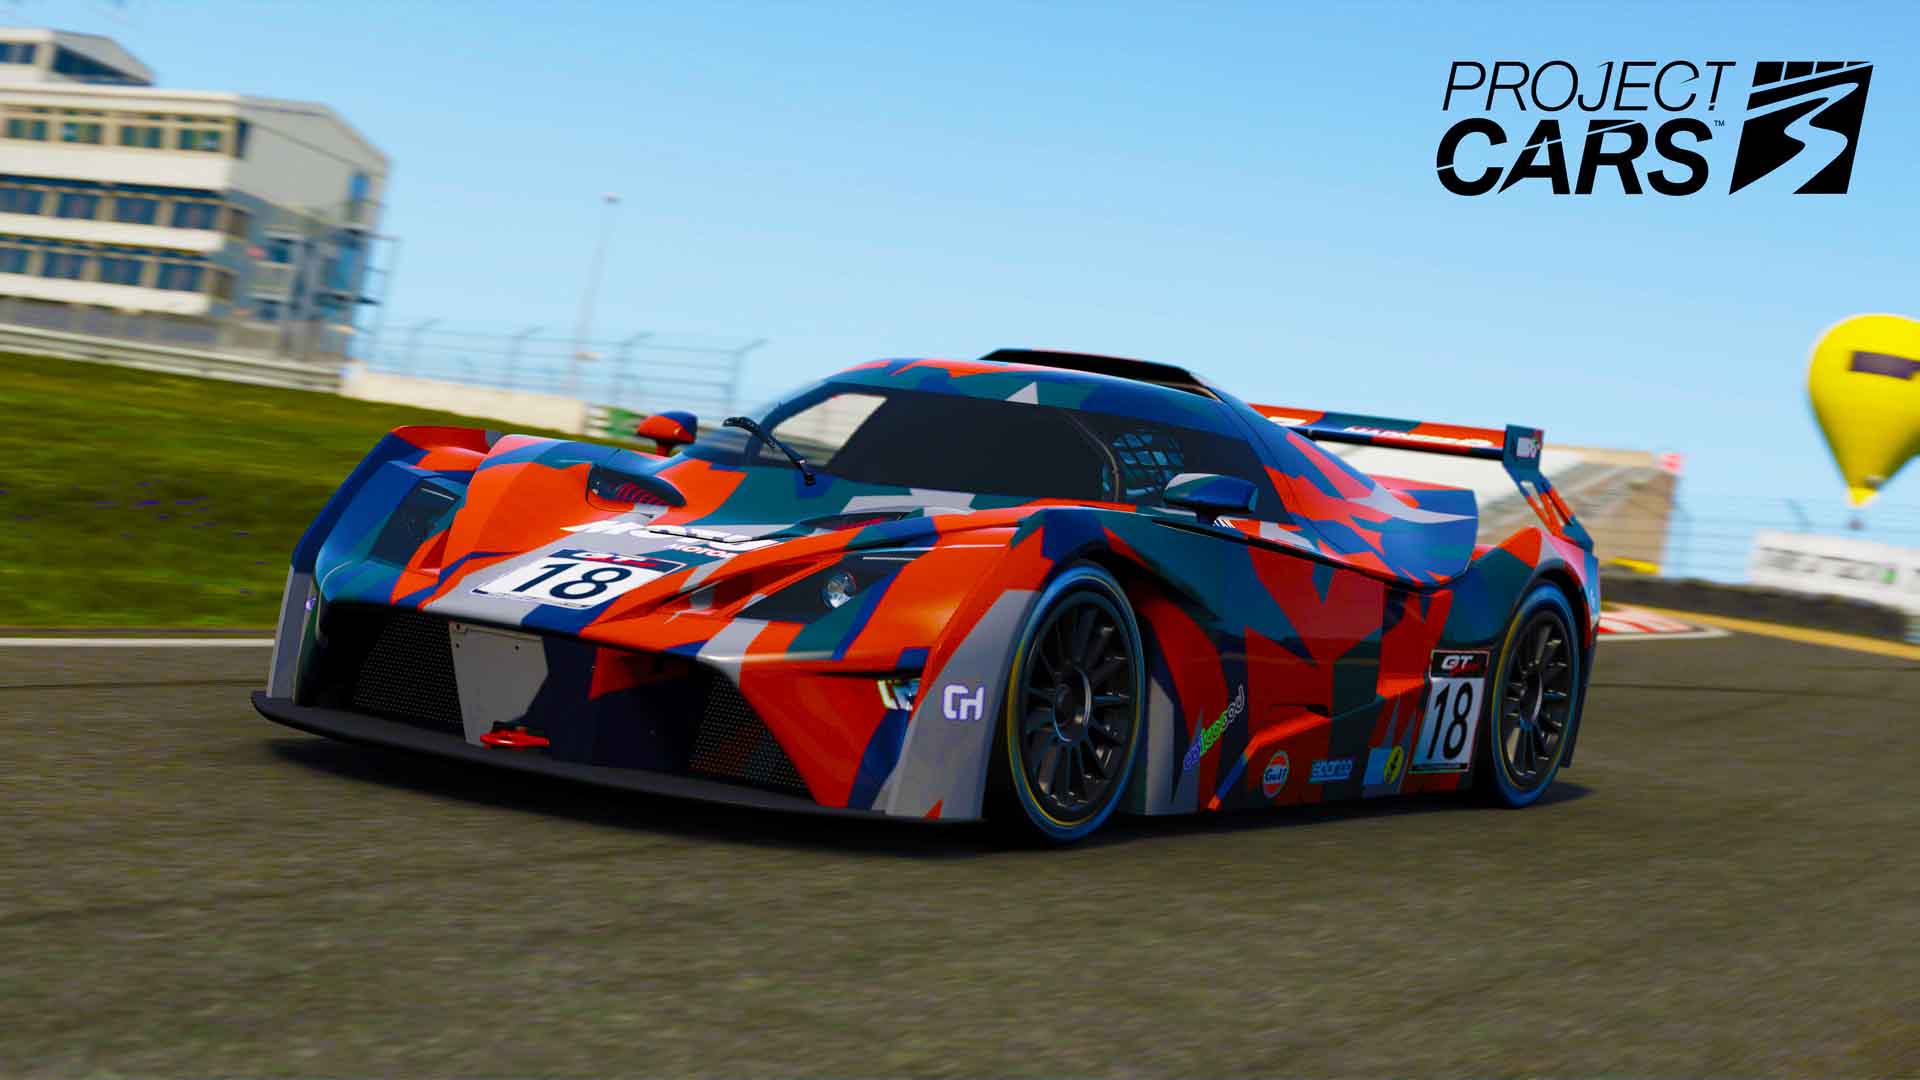 Карс ком. Project cars 3. Project cars 3 ps5. Project cars 2. Project cars 3 автомобили.